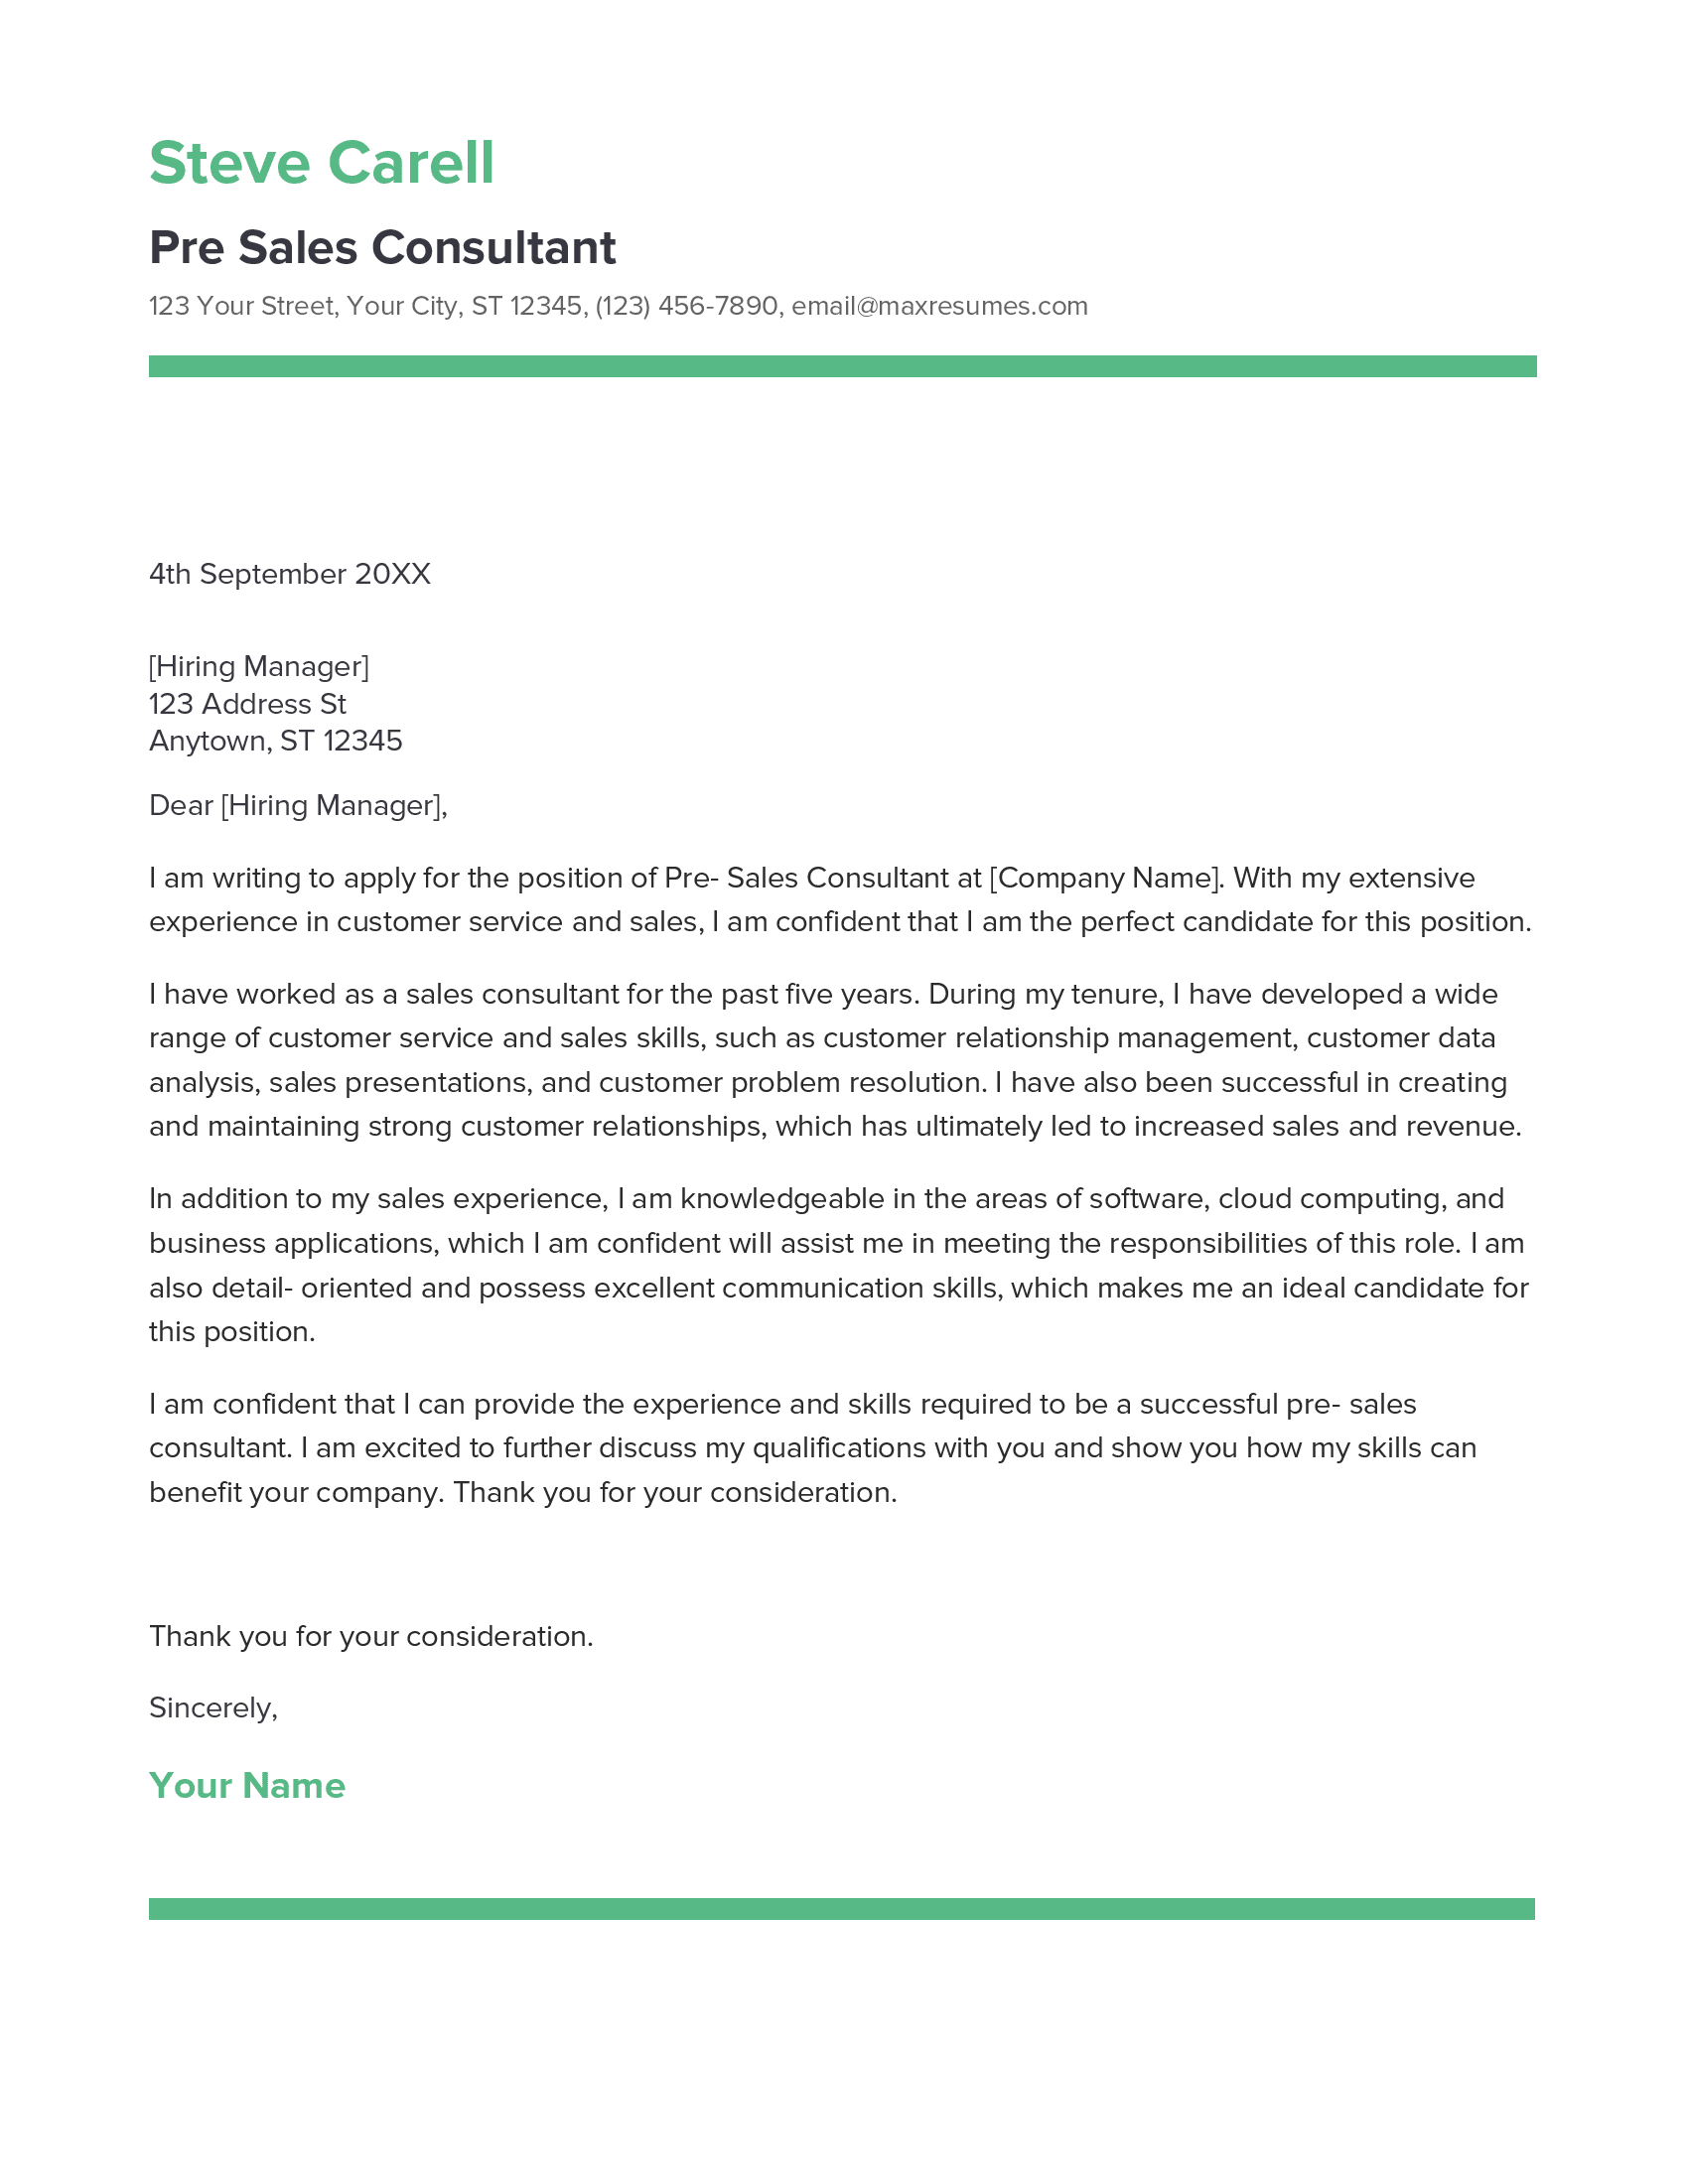 Pre Sales Consultant Cover Letter Example